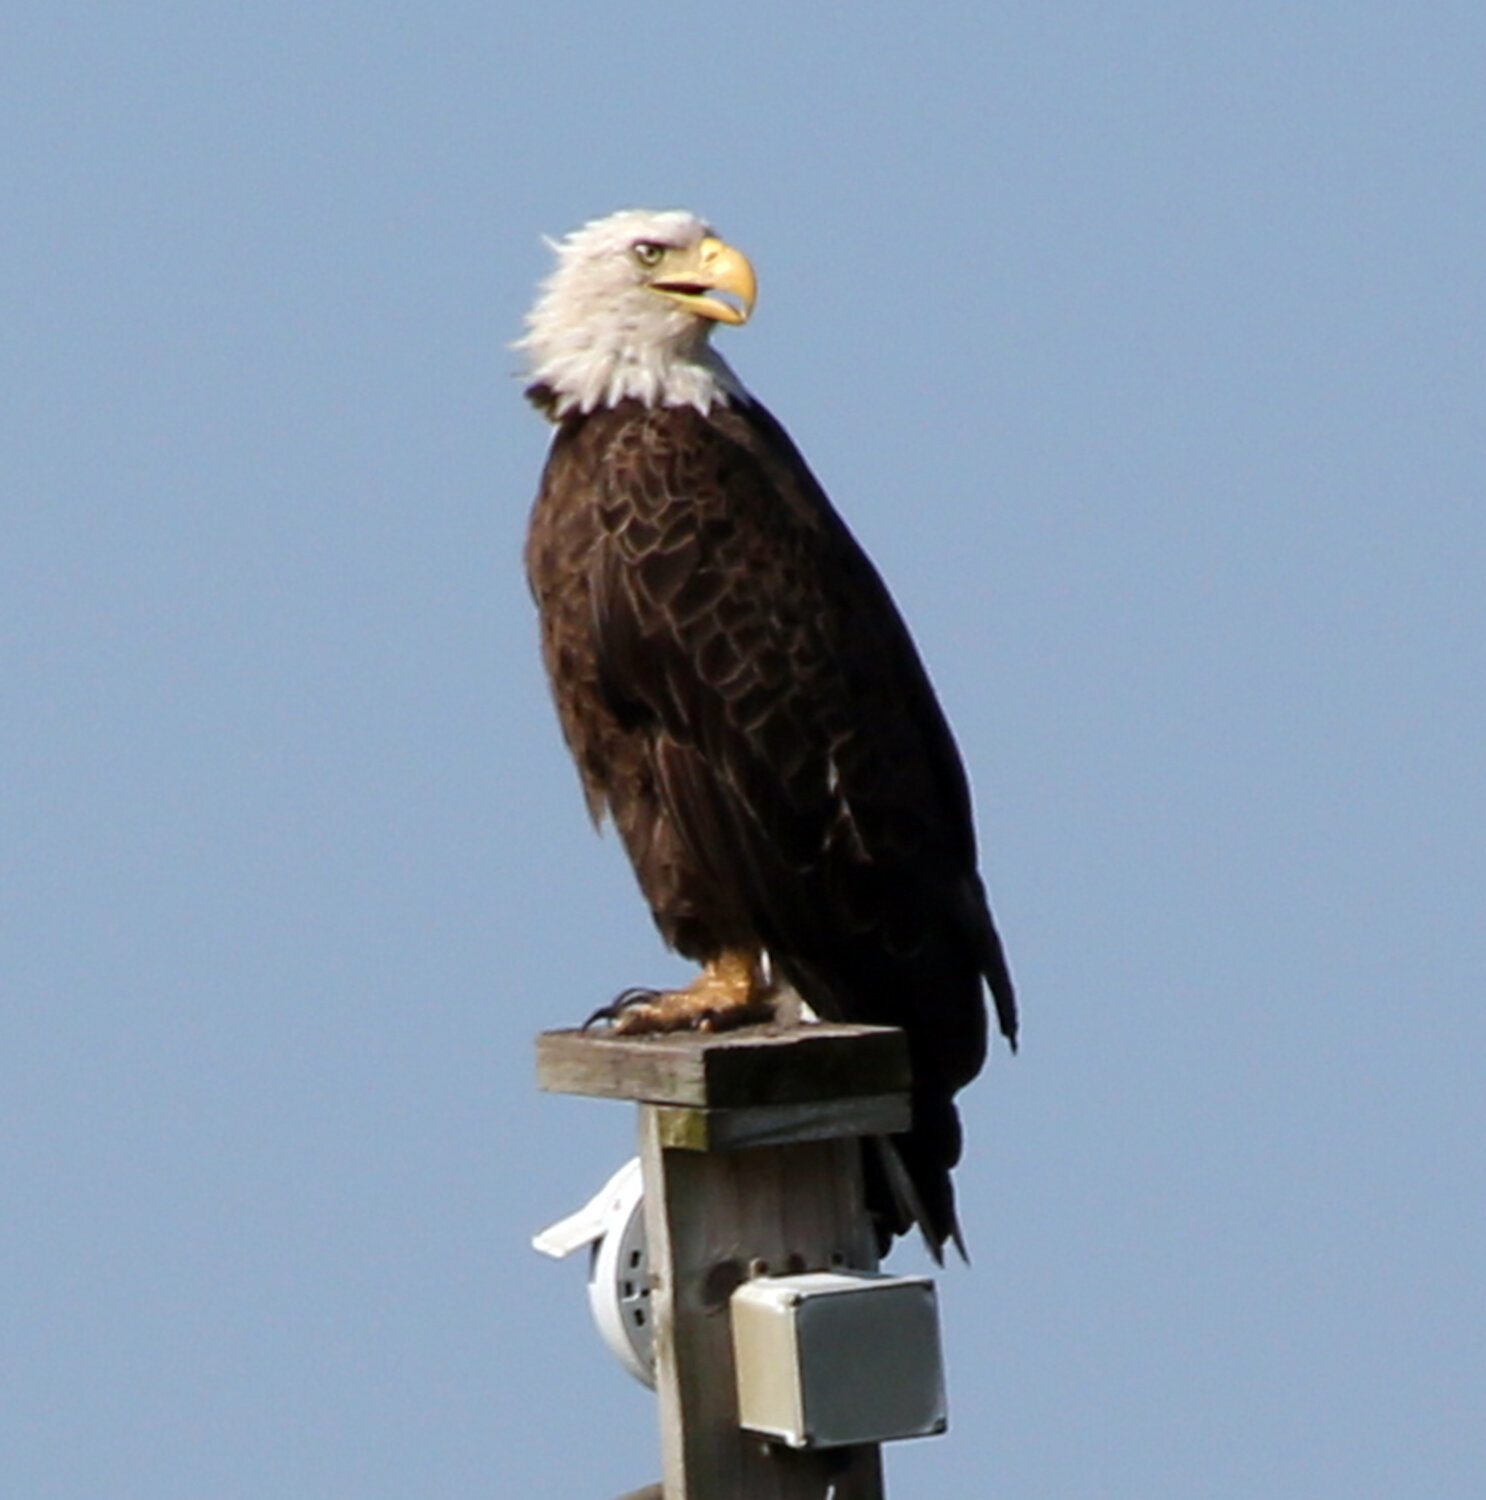 A bald eagle watches over Blackwater National Wildlife Refuge in Dorchester County, Maryland.